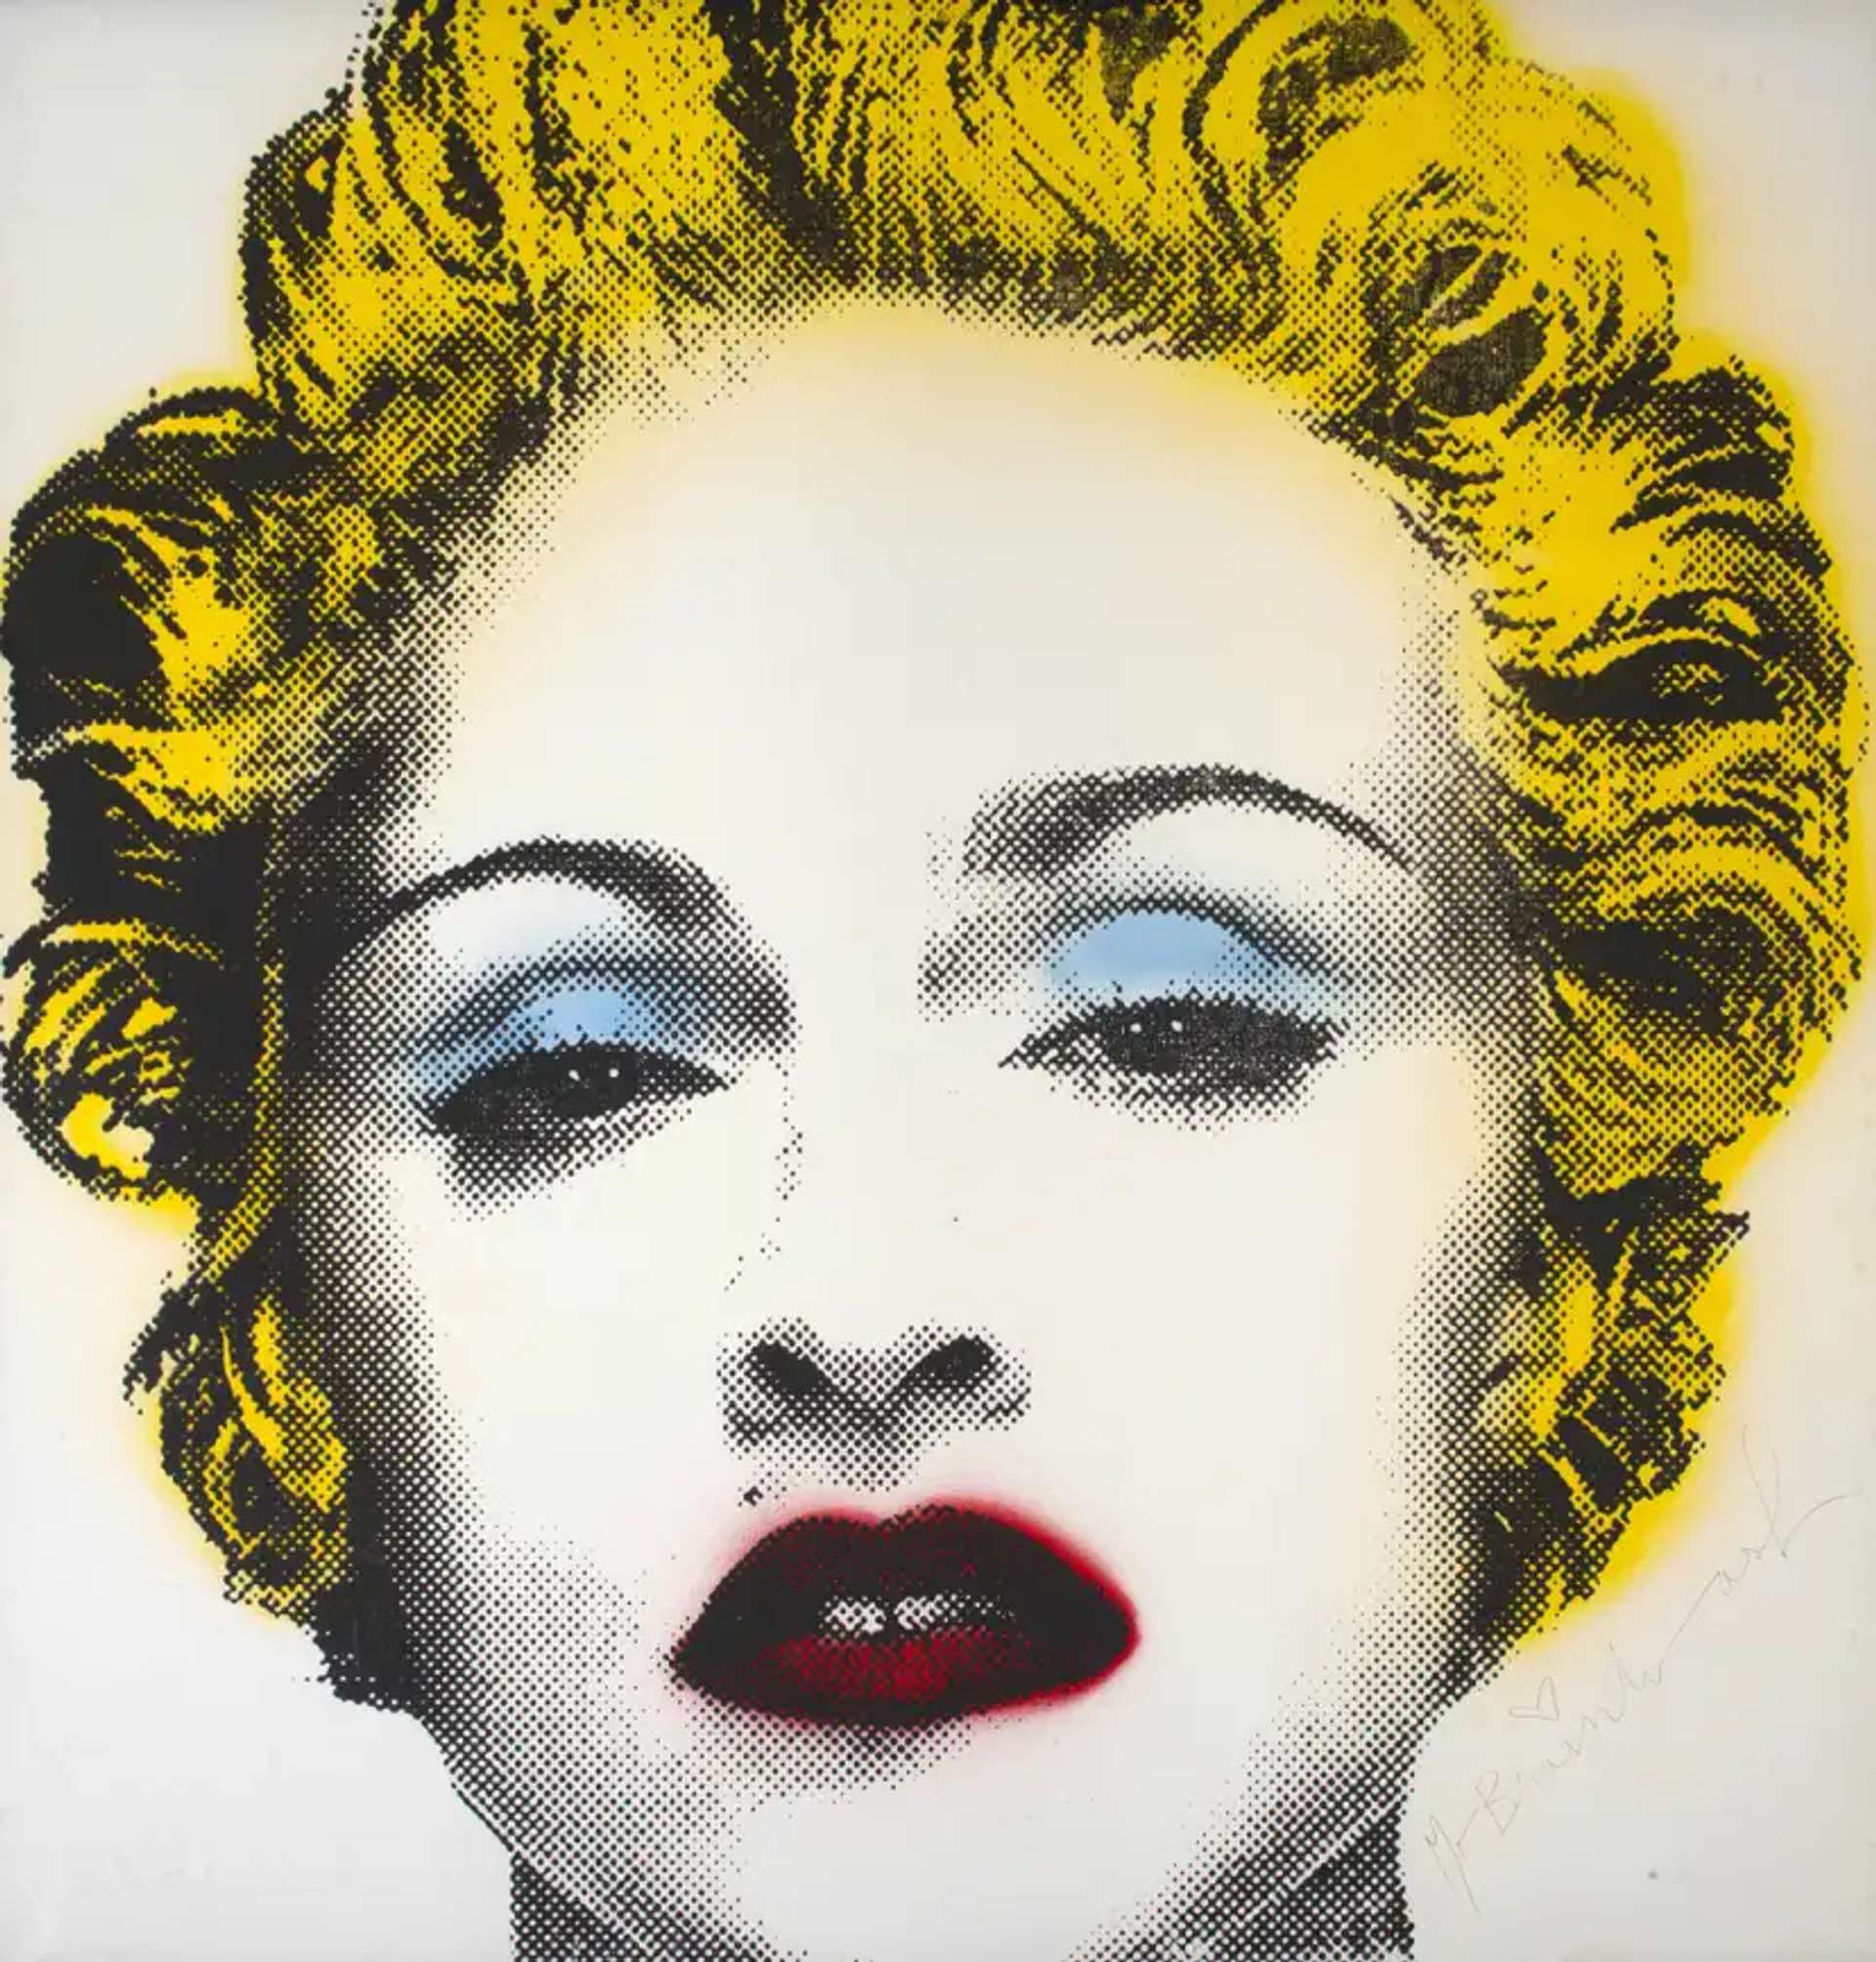 A vibrant screenprint portrait featuring the iconic singer Madonna, showcasing exaggerated yellow hair, blue eye shadow, and red lips. The artwork draws inspiration from Andy Warhol's famous celebrity portraits.